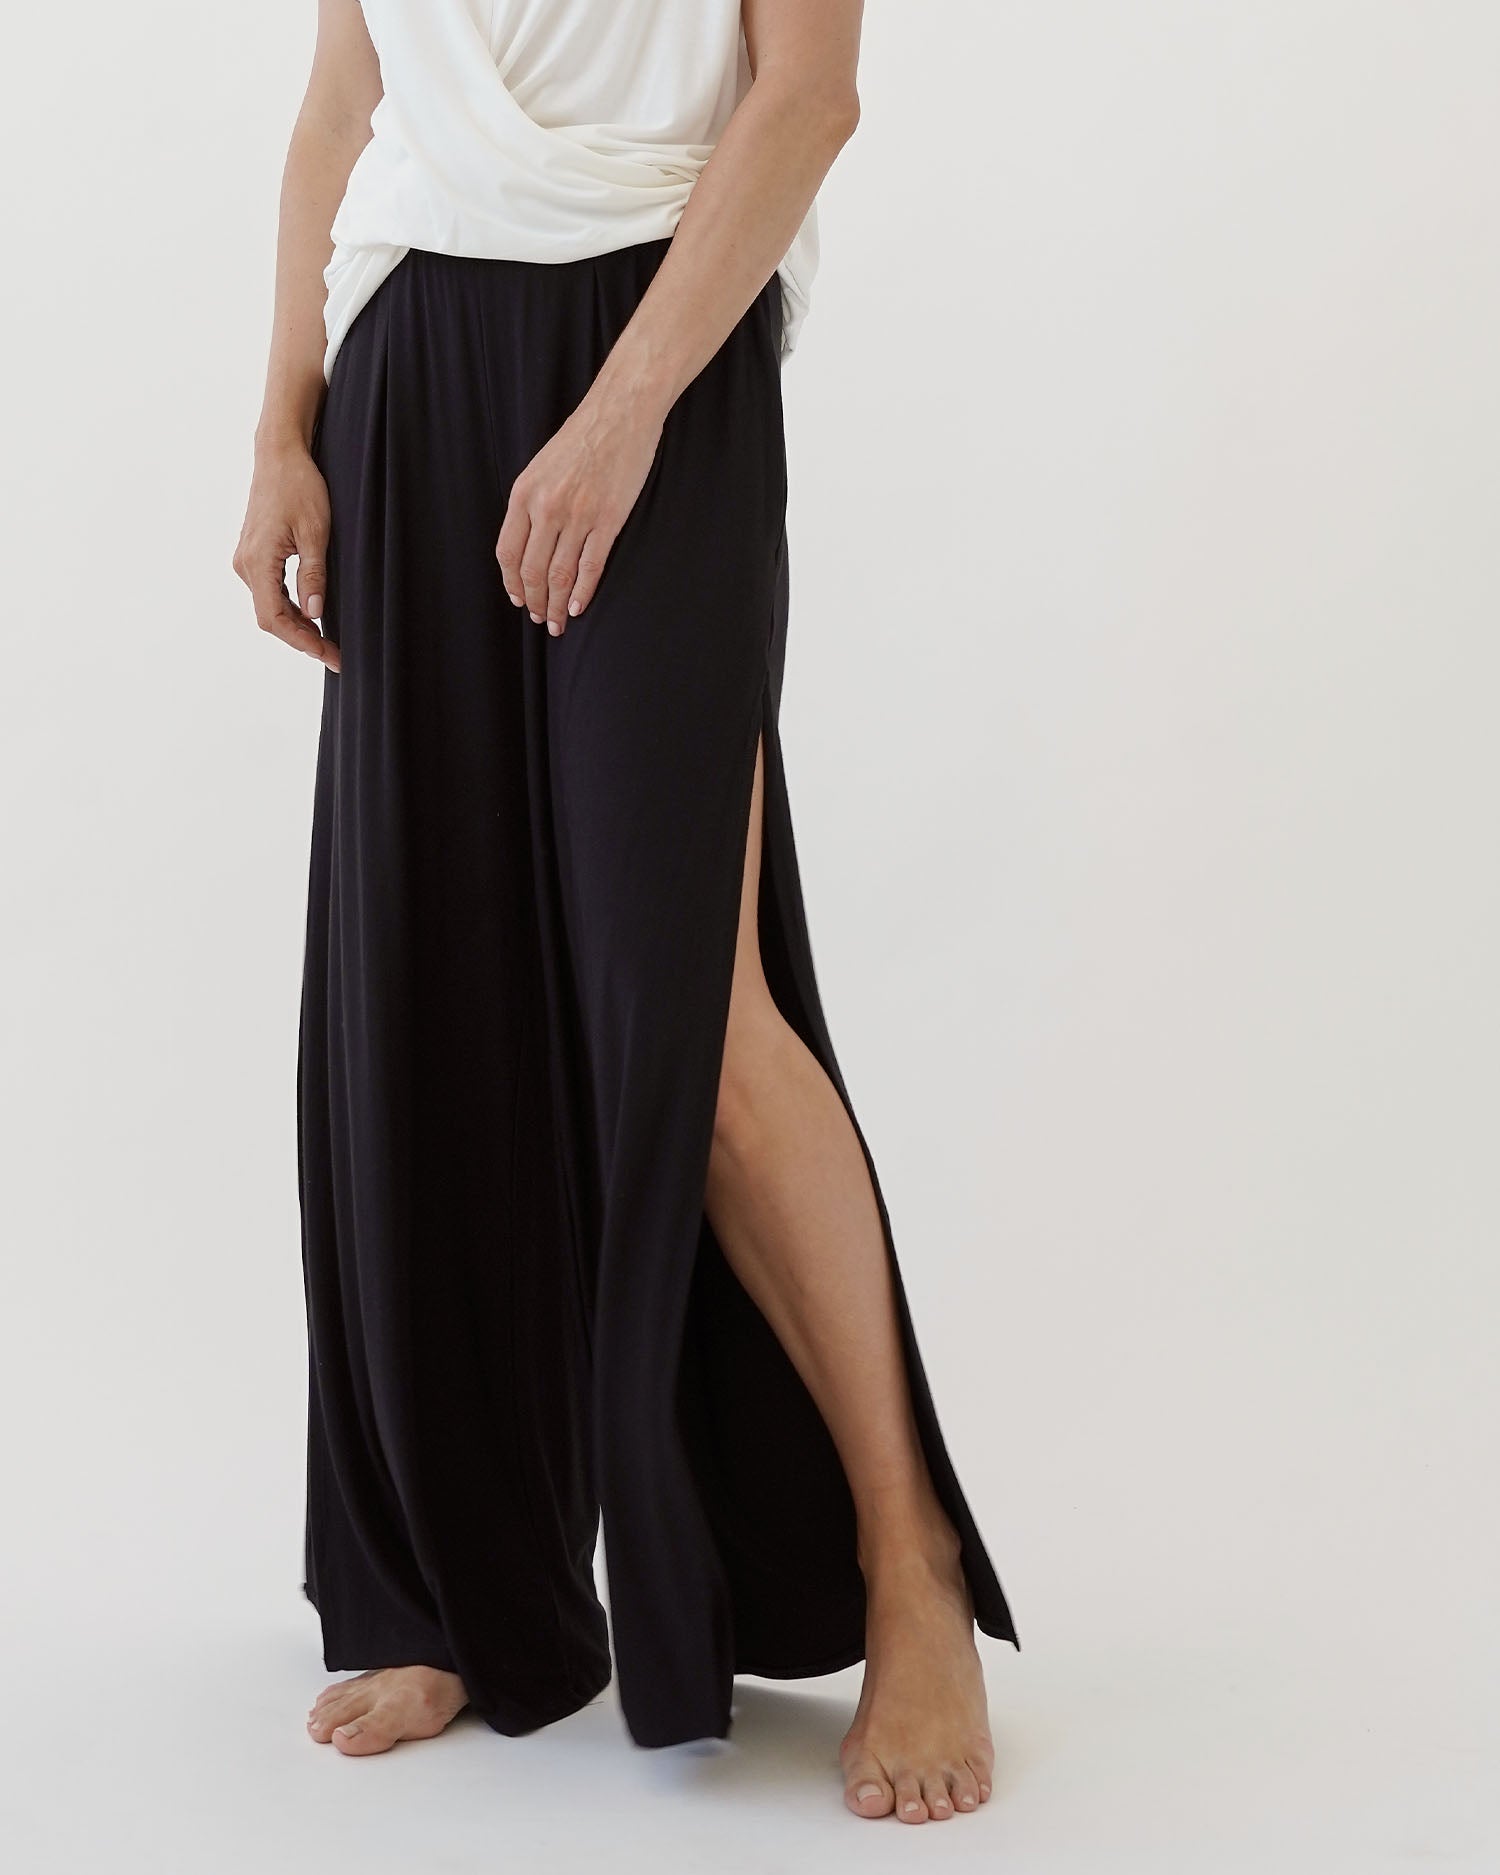 A bamboo pants with side split design